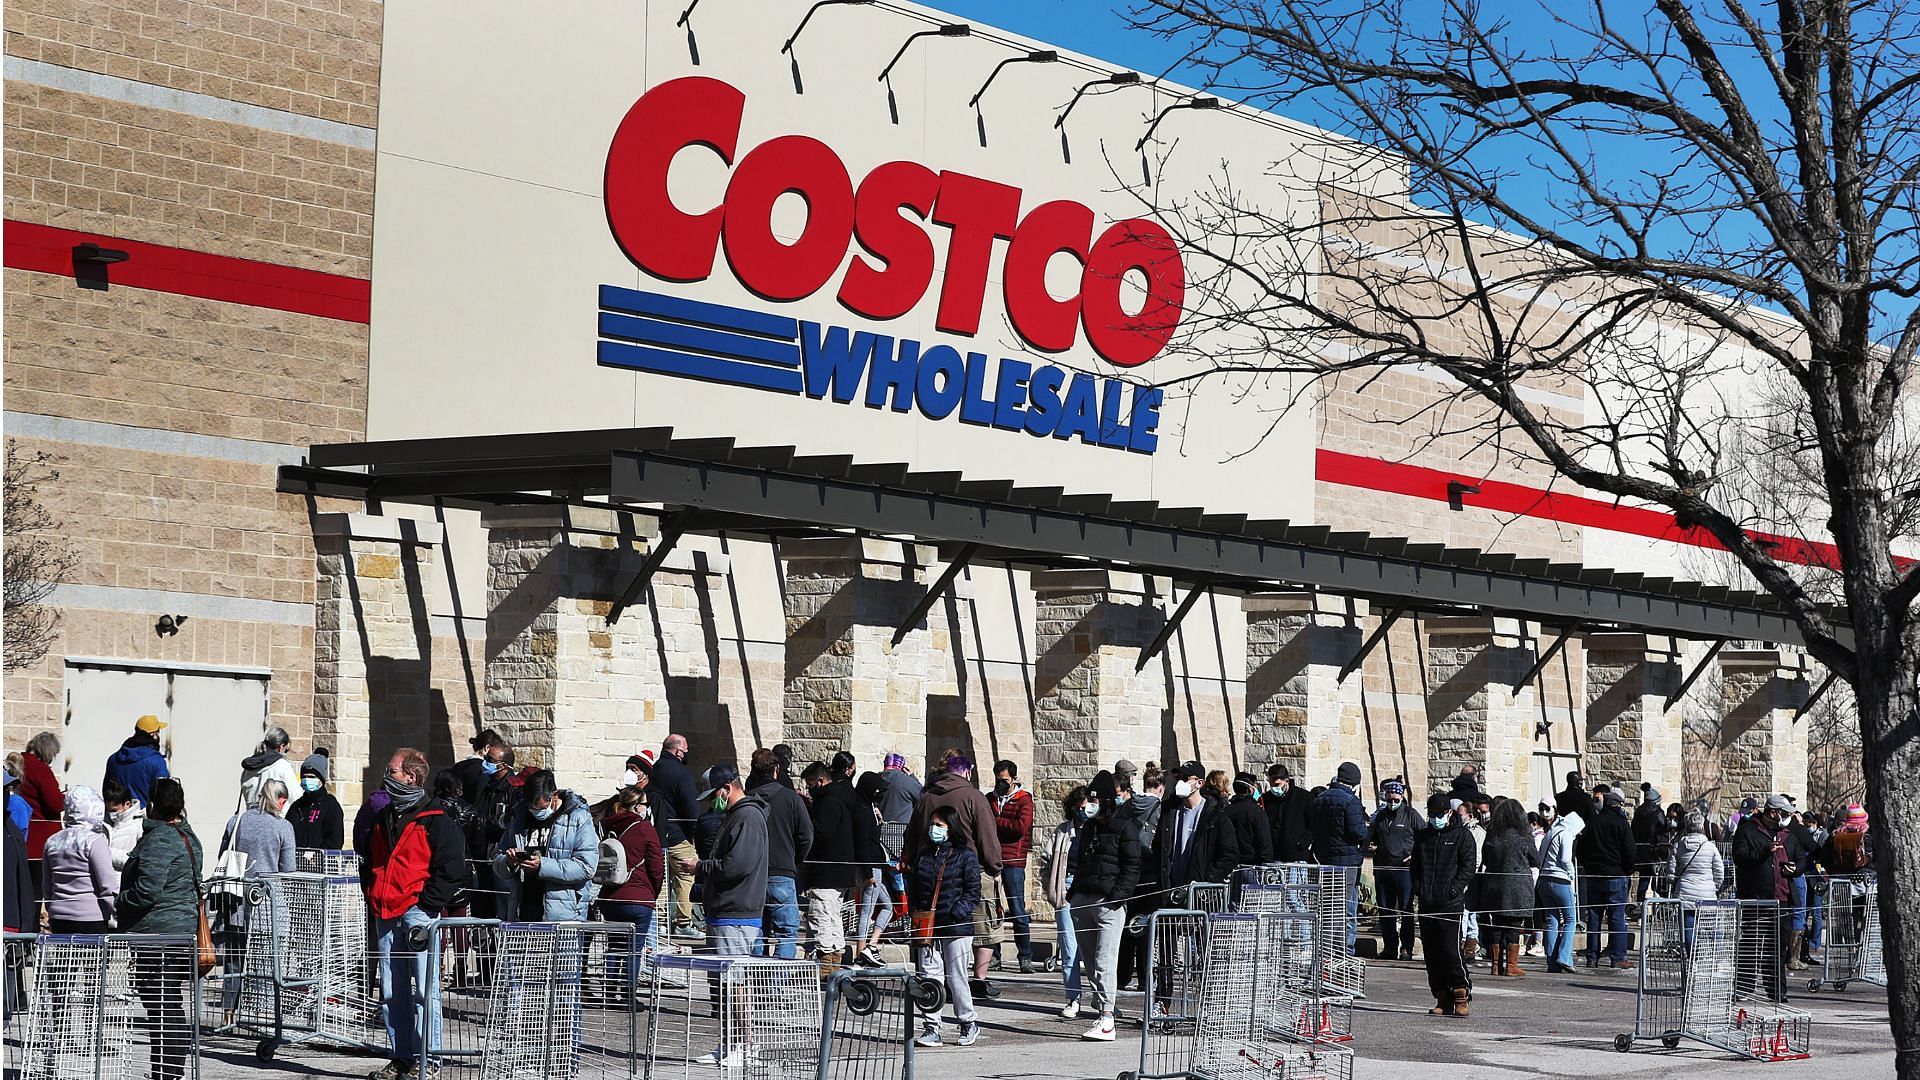 Customers are paying high prices at Costco (Image via Joe Raedle/Getty Images)